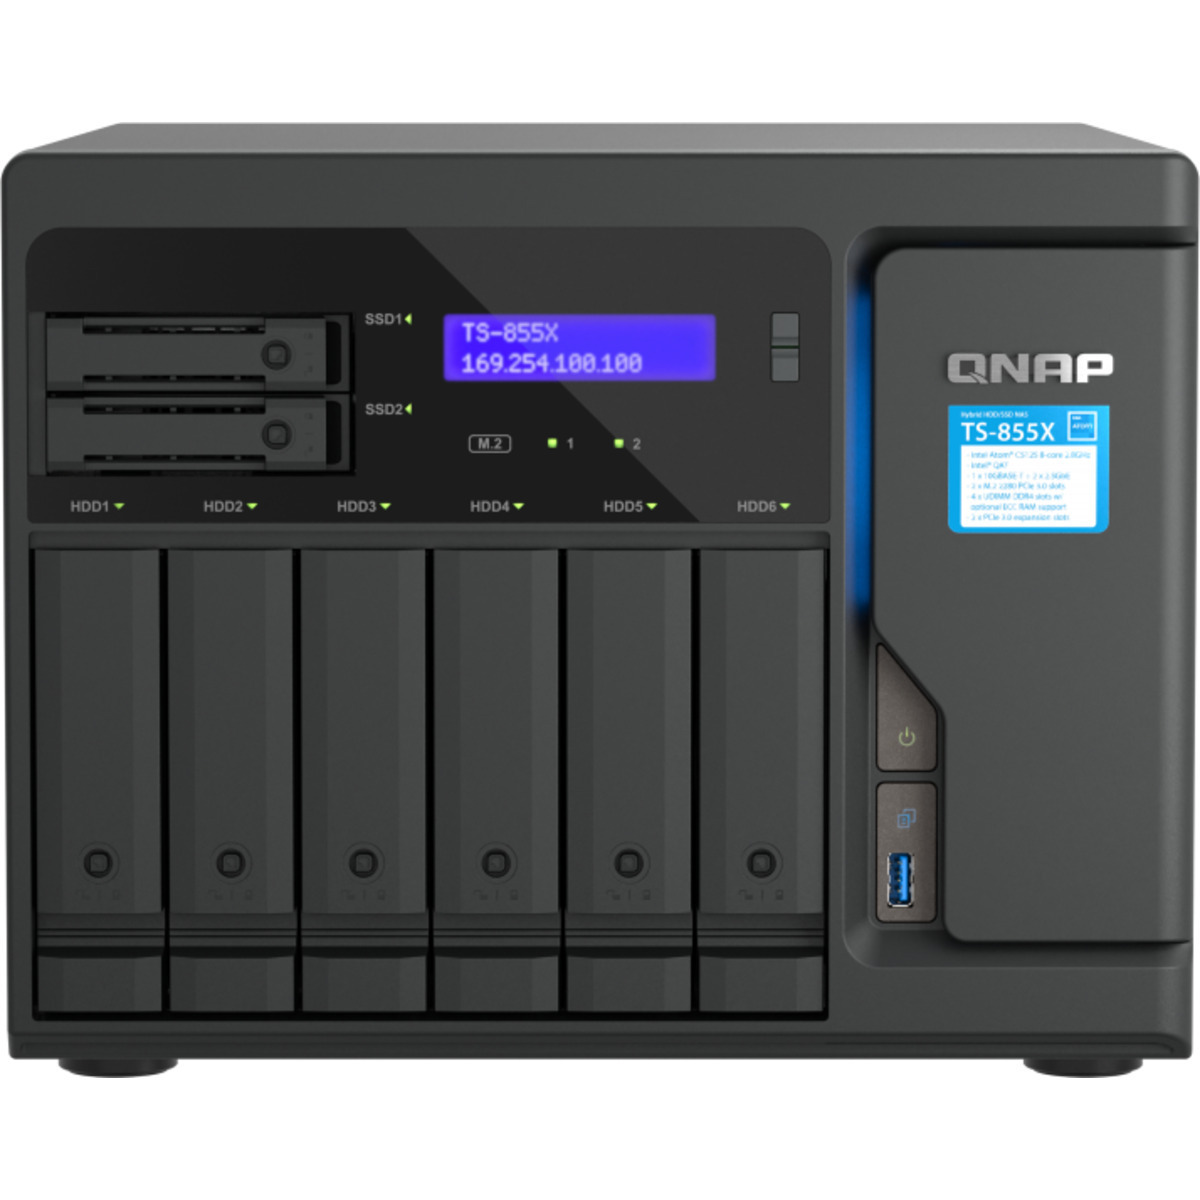 QNAP TS-855X 6tb 6+2-Bay Desktop Multimedia / Power User / Business NAS - Network Attached Storage Device 6x1tb Samsung 870 EVO MZ-77E1T0BAM 2.5 560/530MB/s SATA 6Gb/s SSD CONSUMER Class Drives Installed - Burn-In Tested - FREE RAM UPGRADE TS-855X